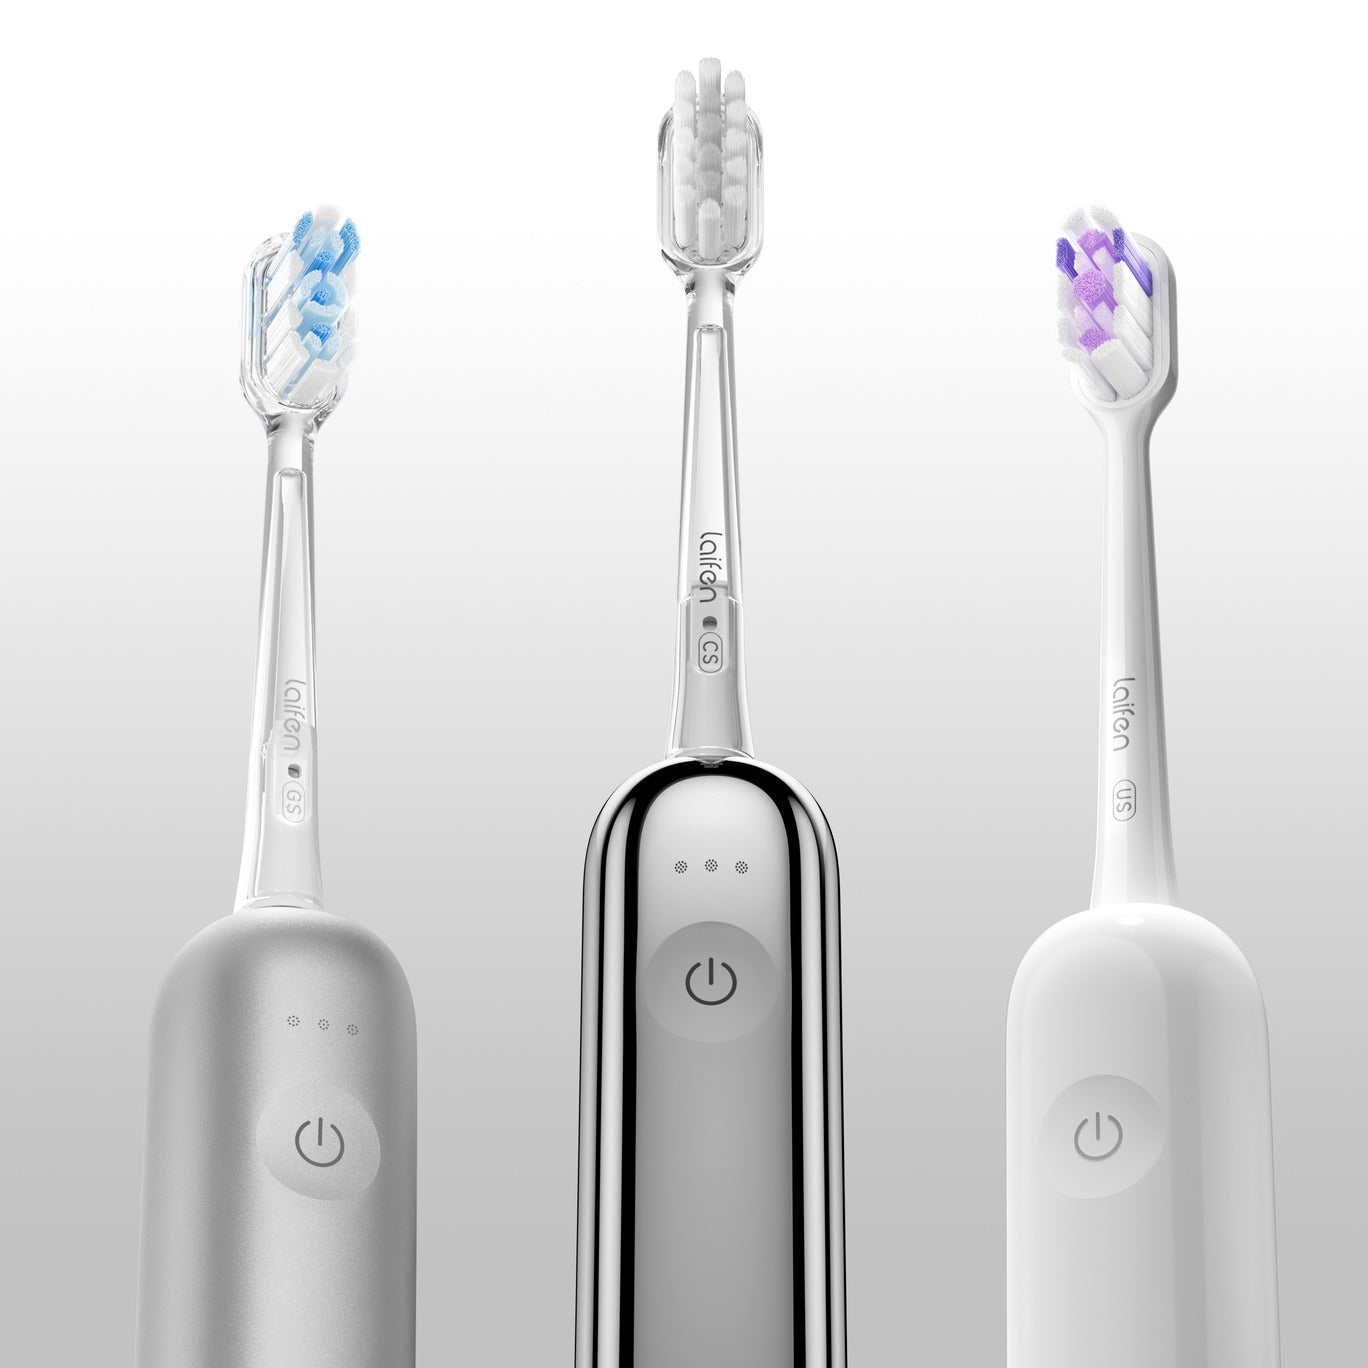 Best oscillating toothbrush electric Laifen Wave